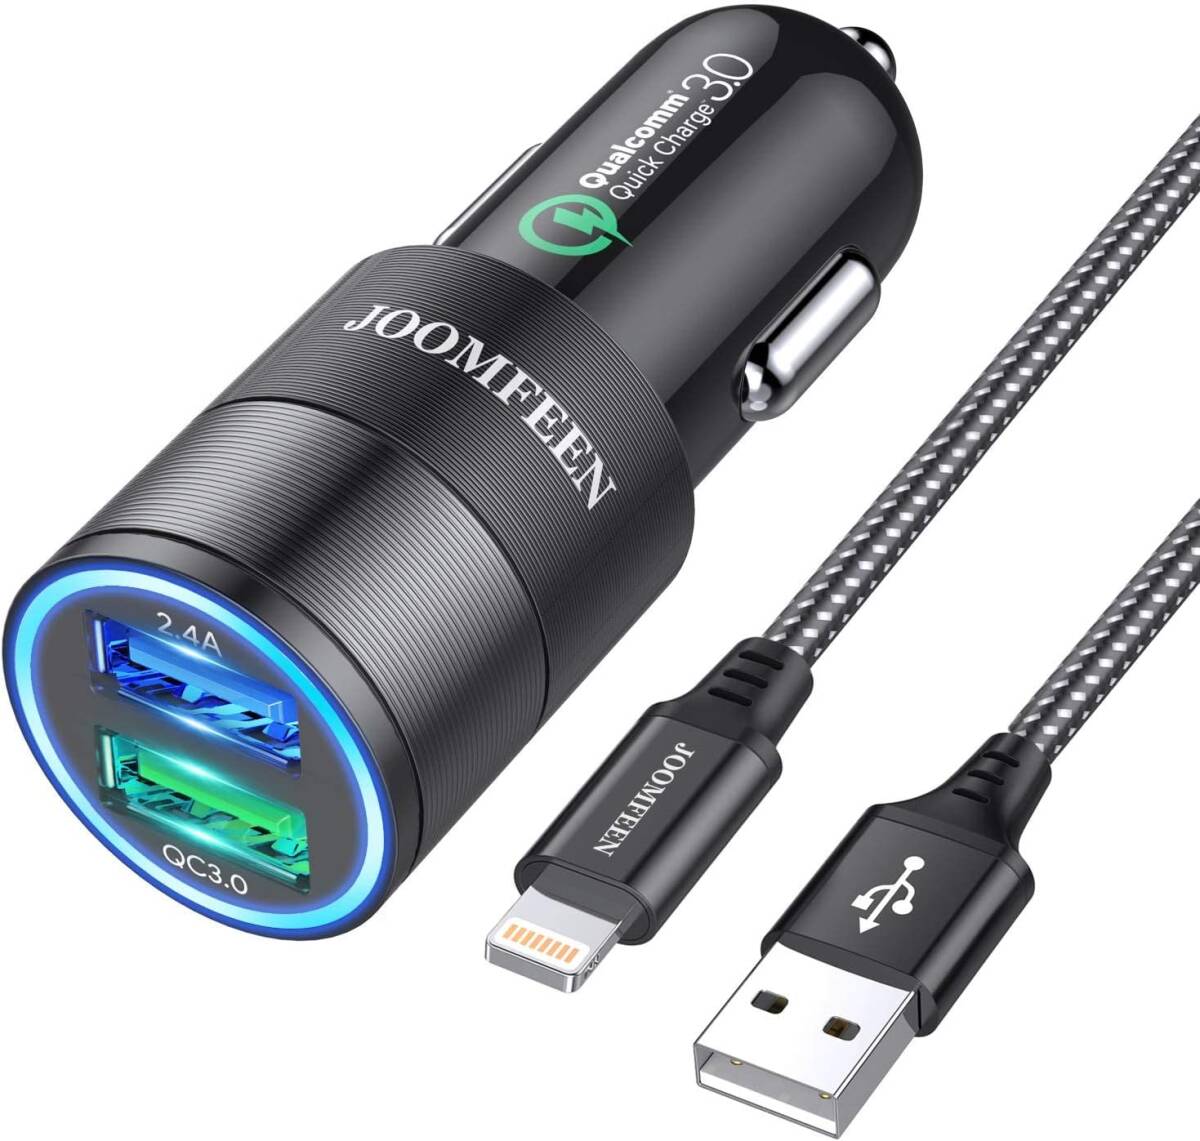  black + lightning [Quick Charge 3.0]JOOMFEEN in-vehicle charger 2usb port cigar socket charger si